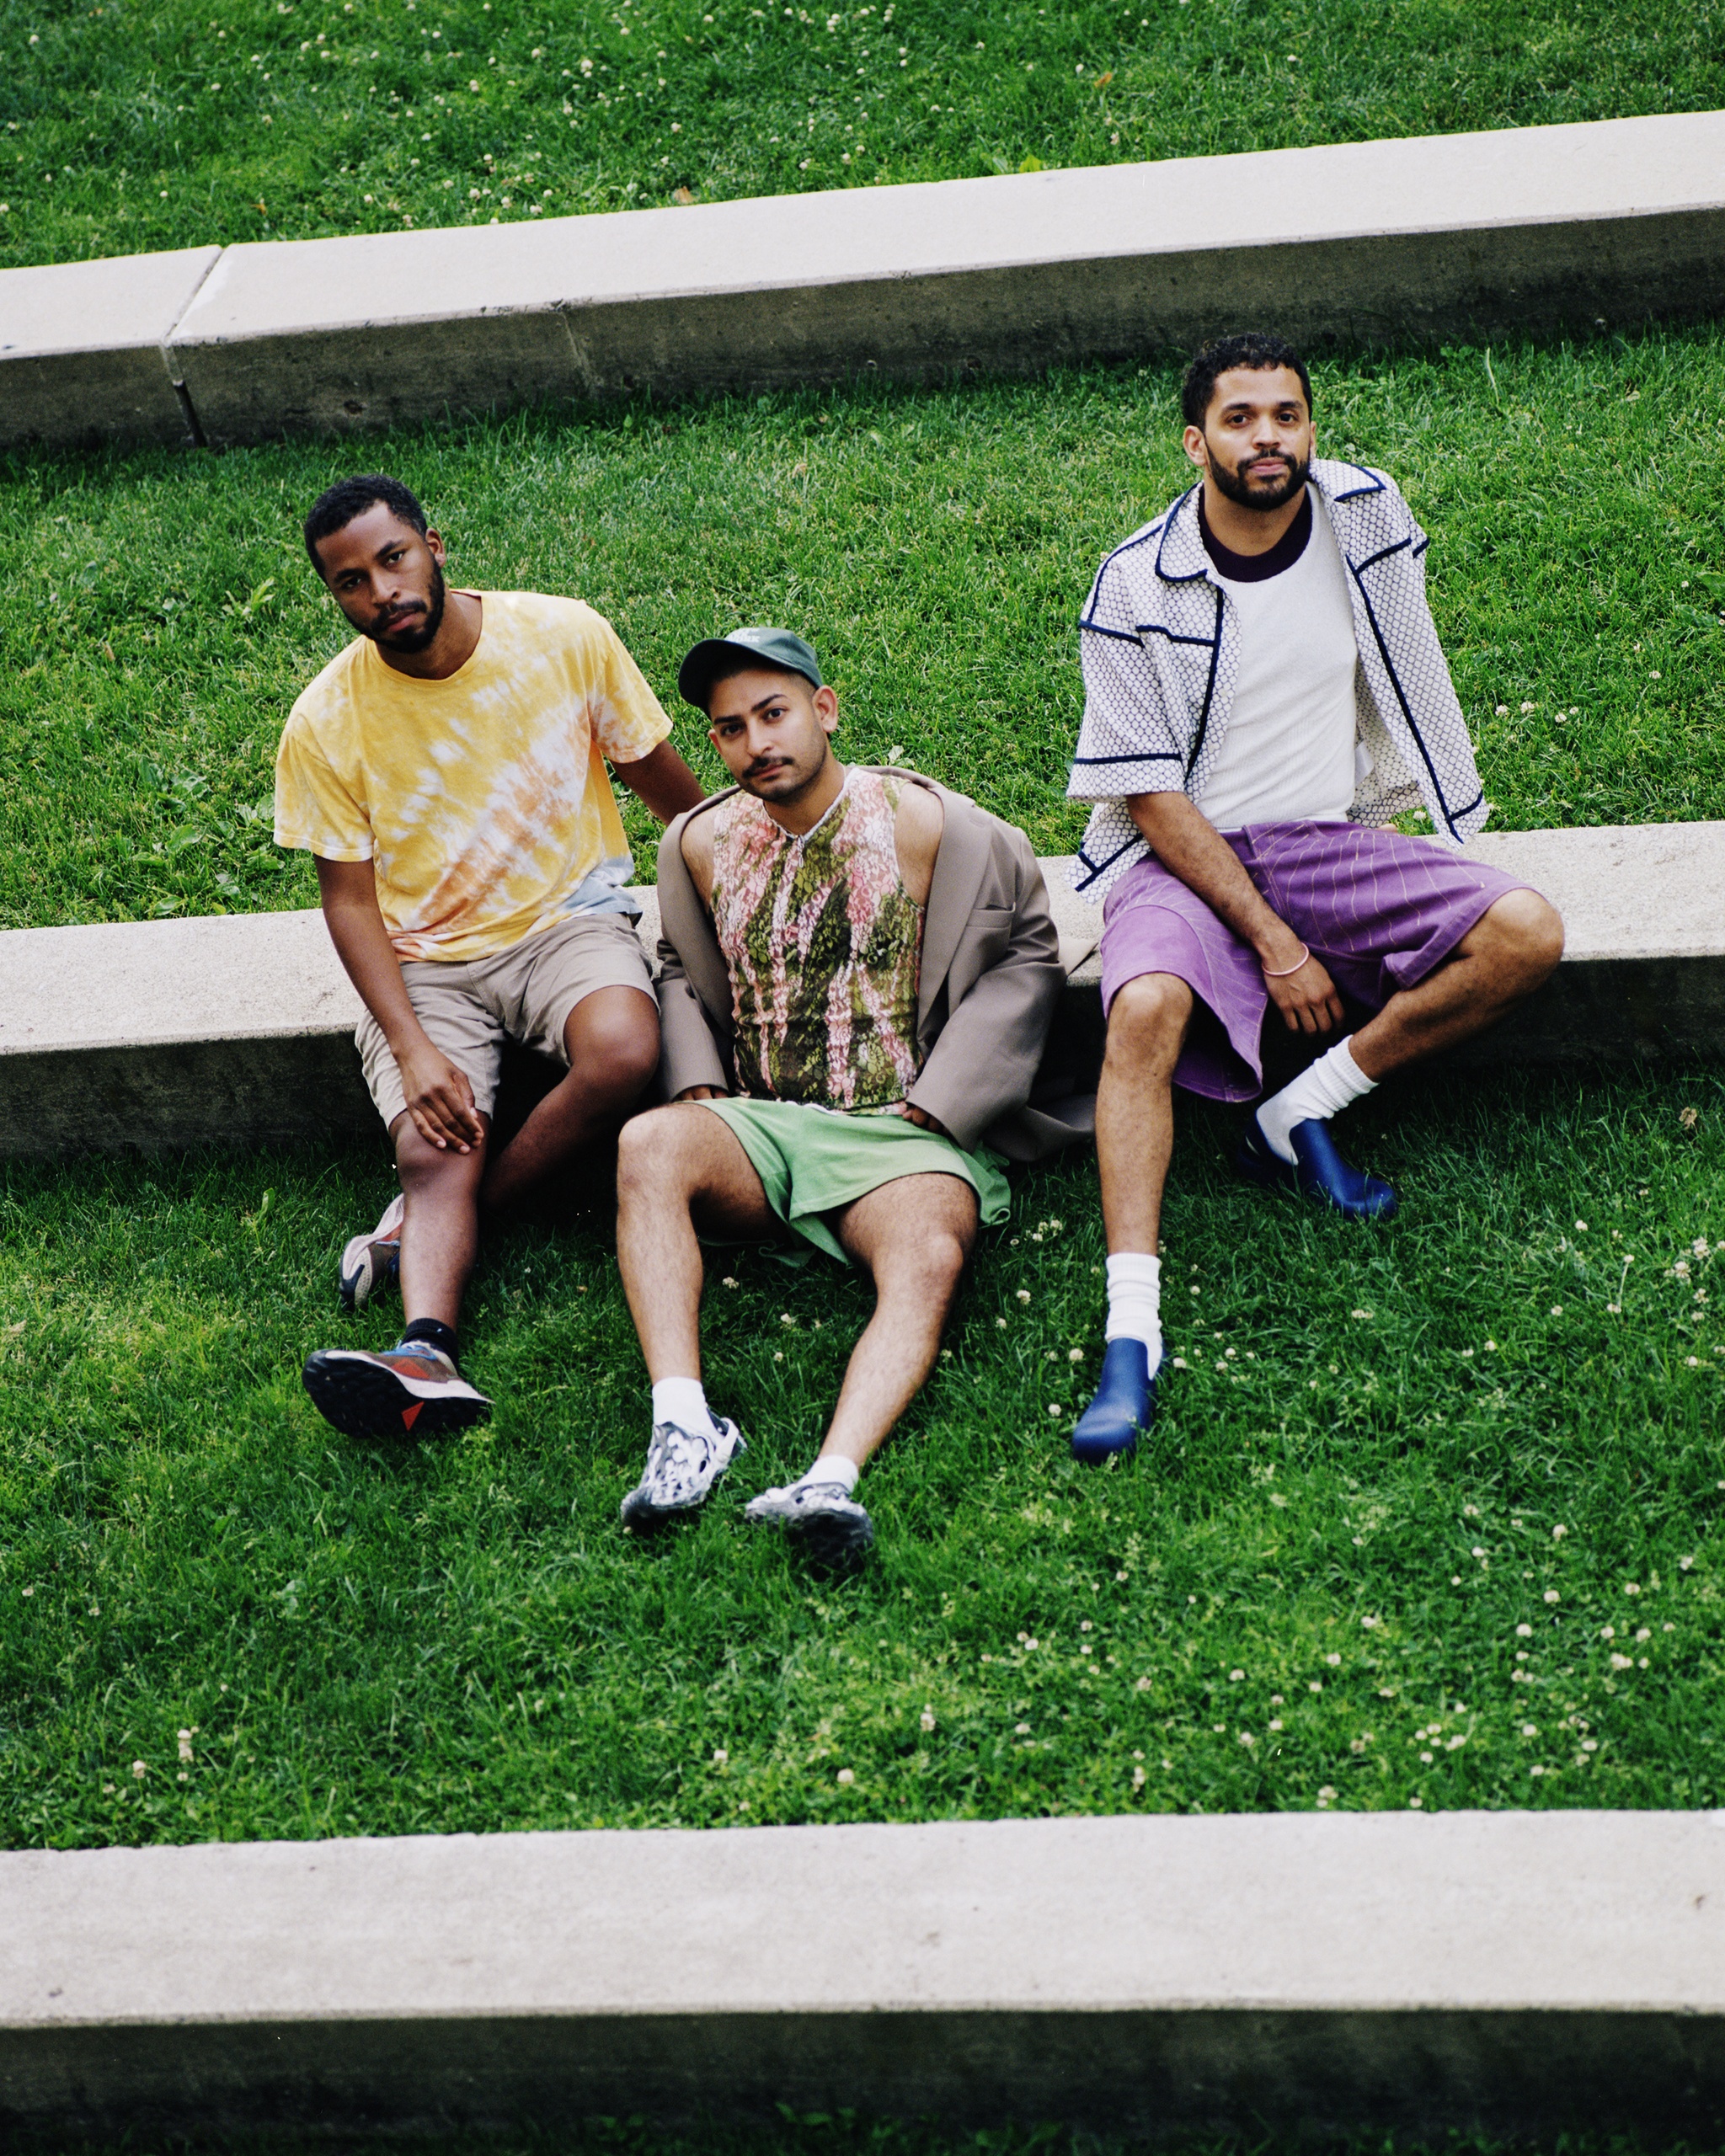 Three members of the art collective Papi Juice, all people of color, lounge on a grassy amphitheatre-like structure. They wear casual summery clothes: tshirts, shorts, baseball caps. 